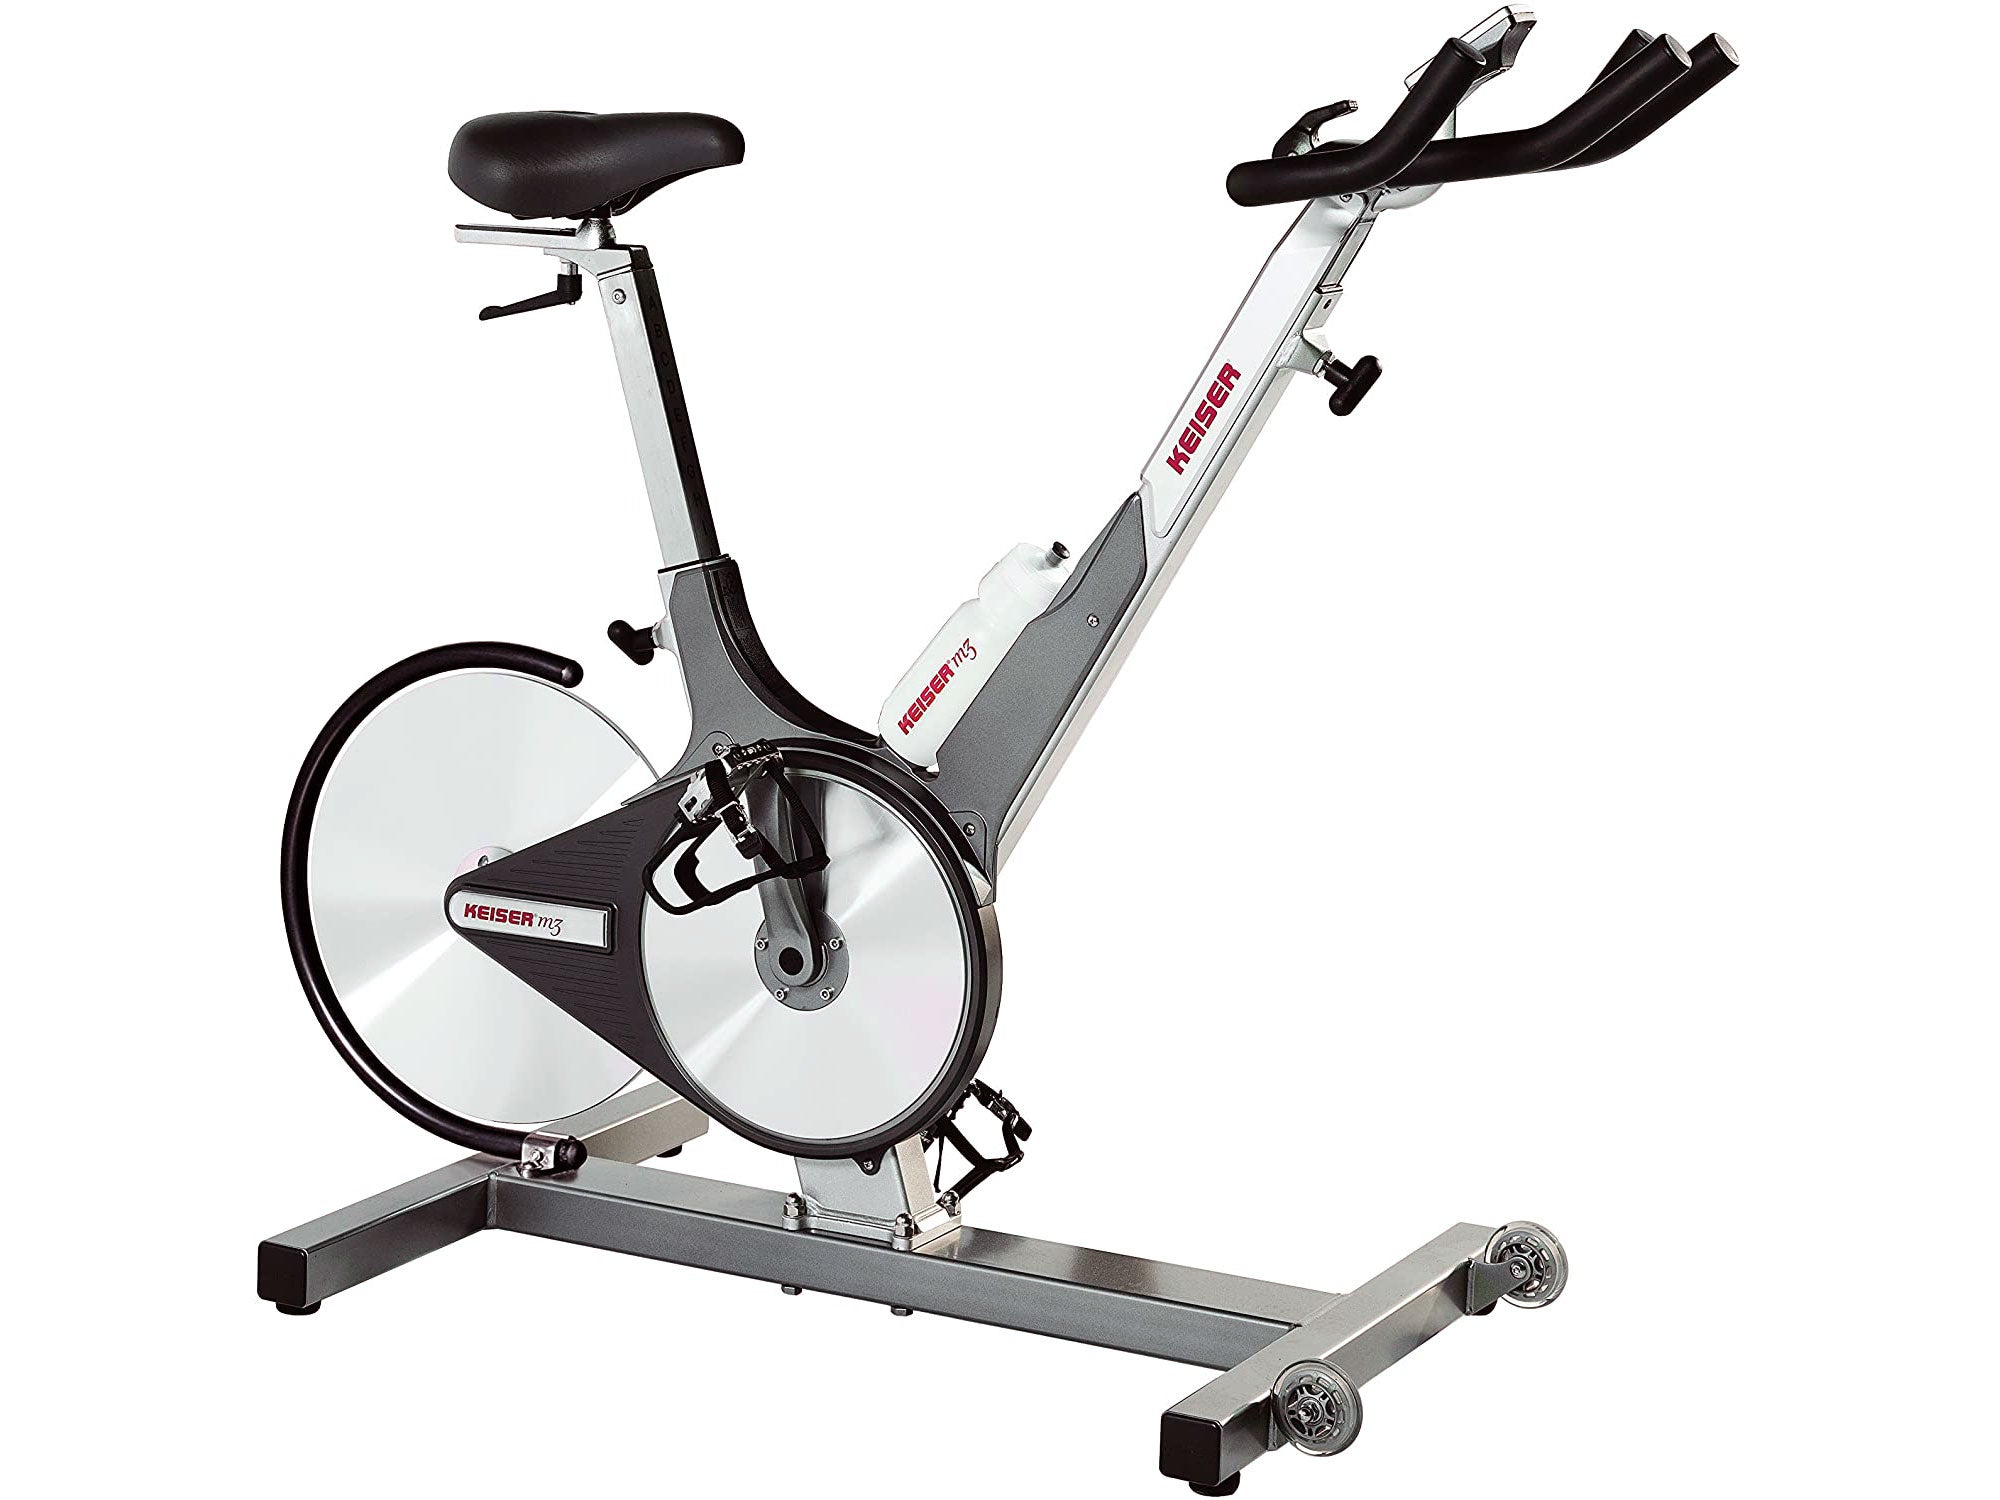 Factory photo of a Used Keiser M3 Indoor Group Cycling Bike